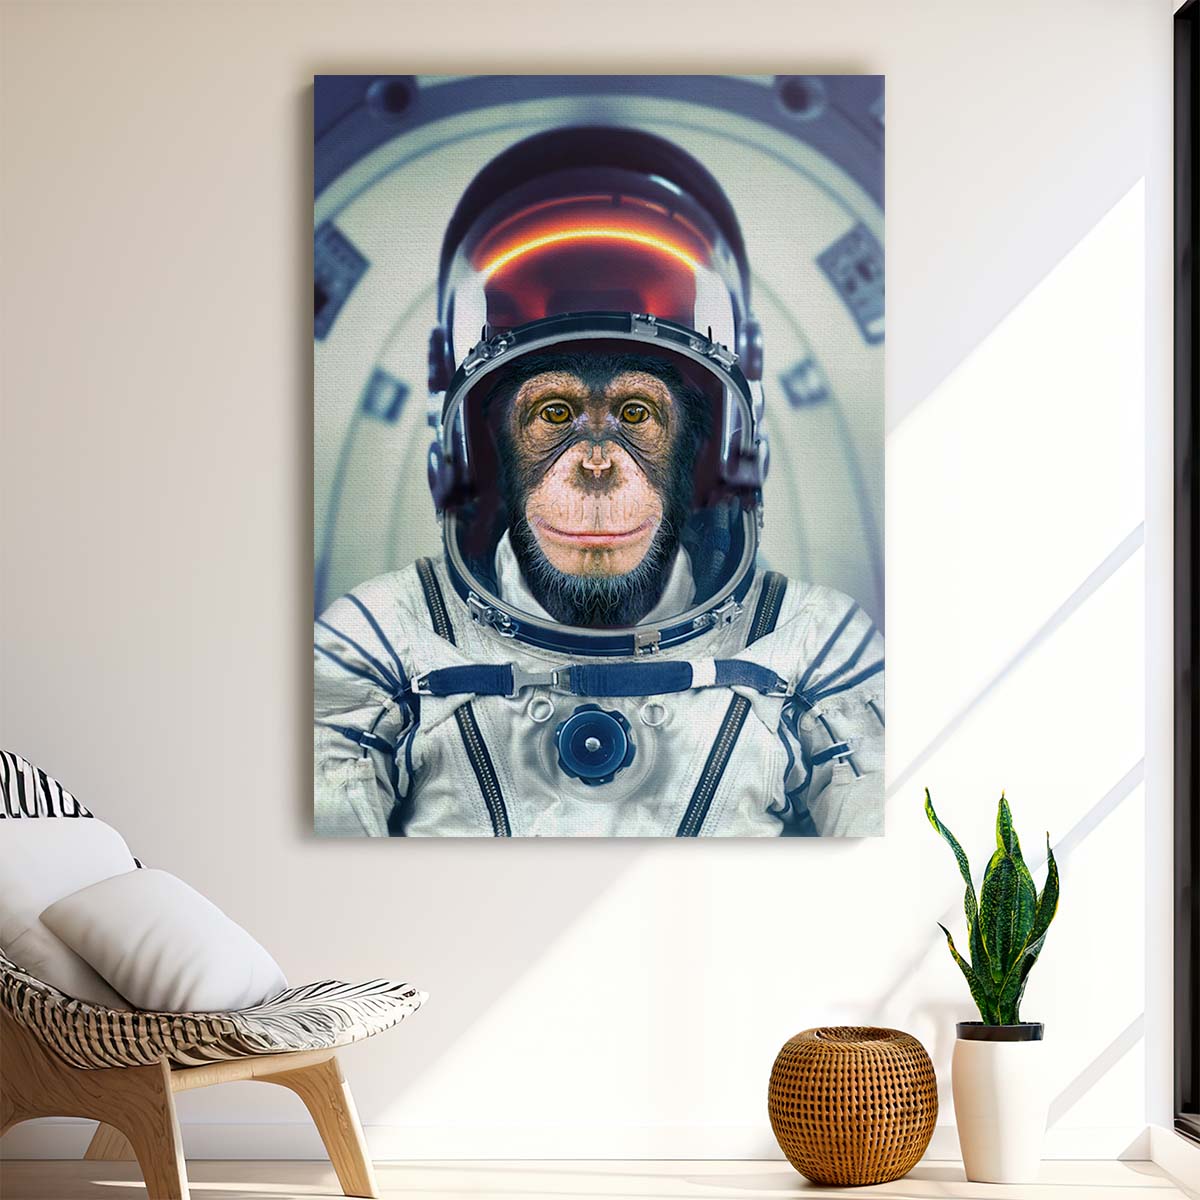 Fantasy Monkey Astronaut Photography by Marcel Egger - Creative Space Art by Luxuriance Designs, made in USA